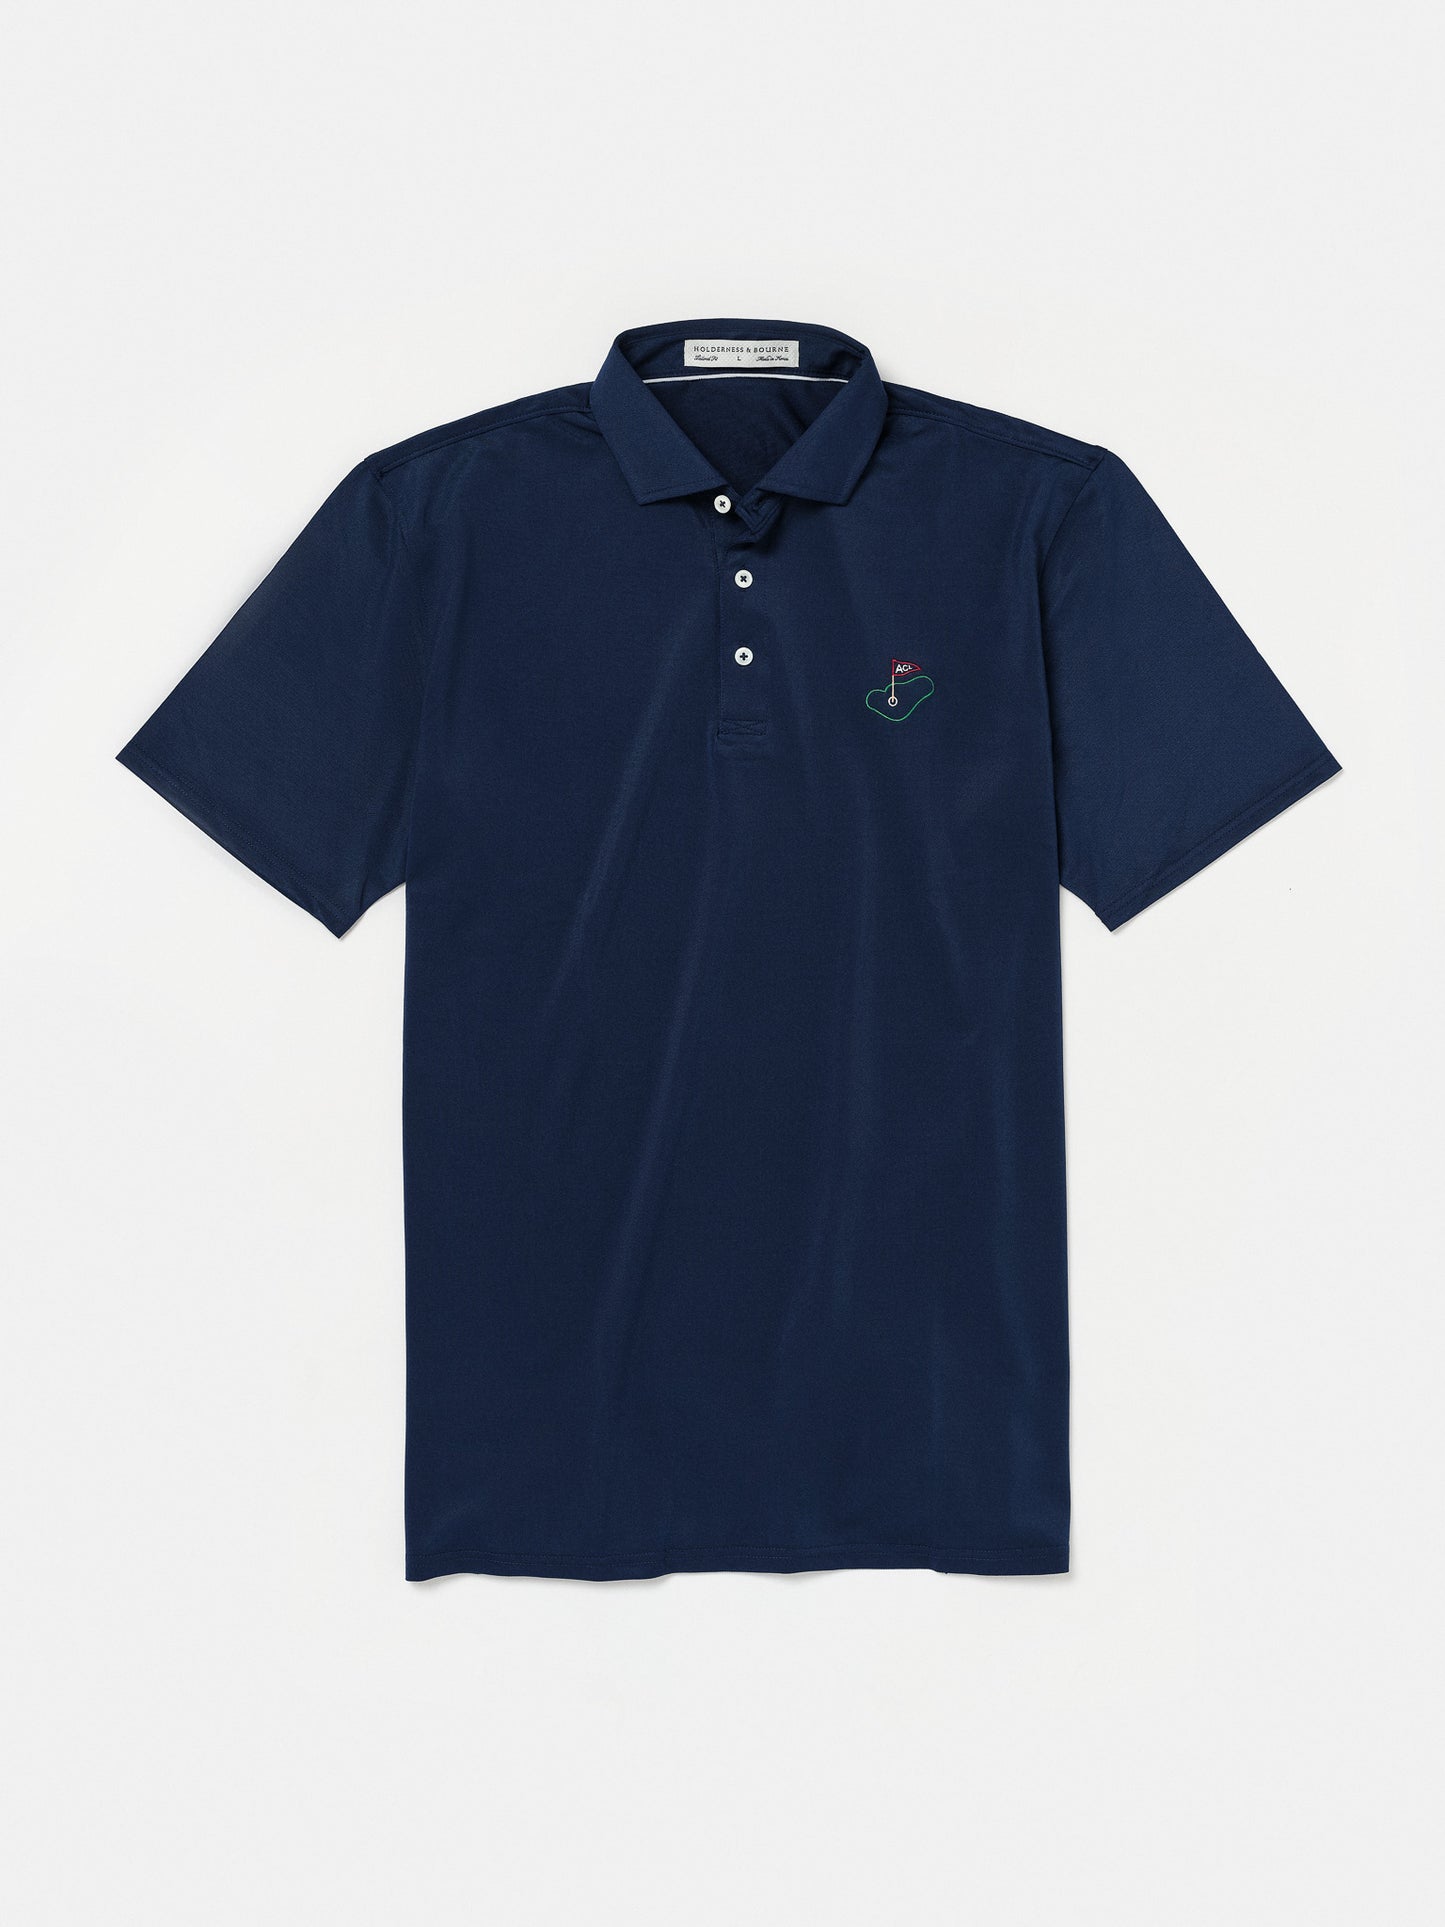 Holderness & Bourne Performance Polo in Navy